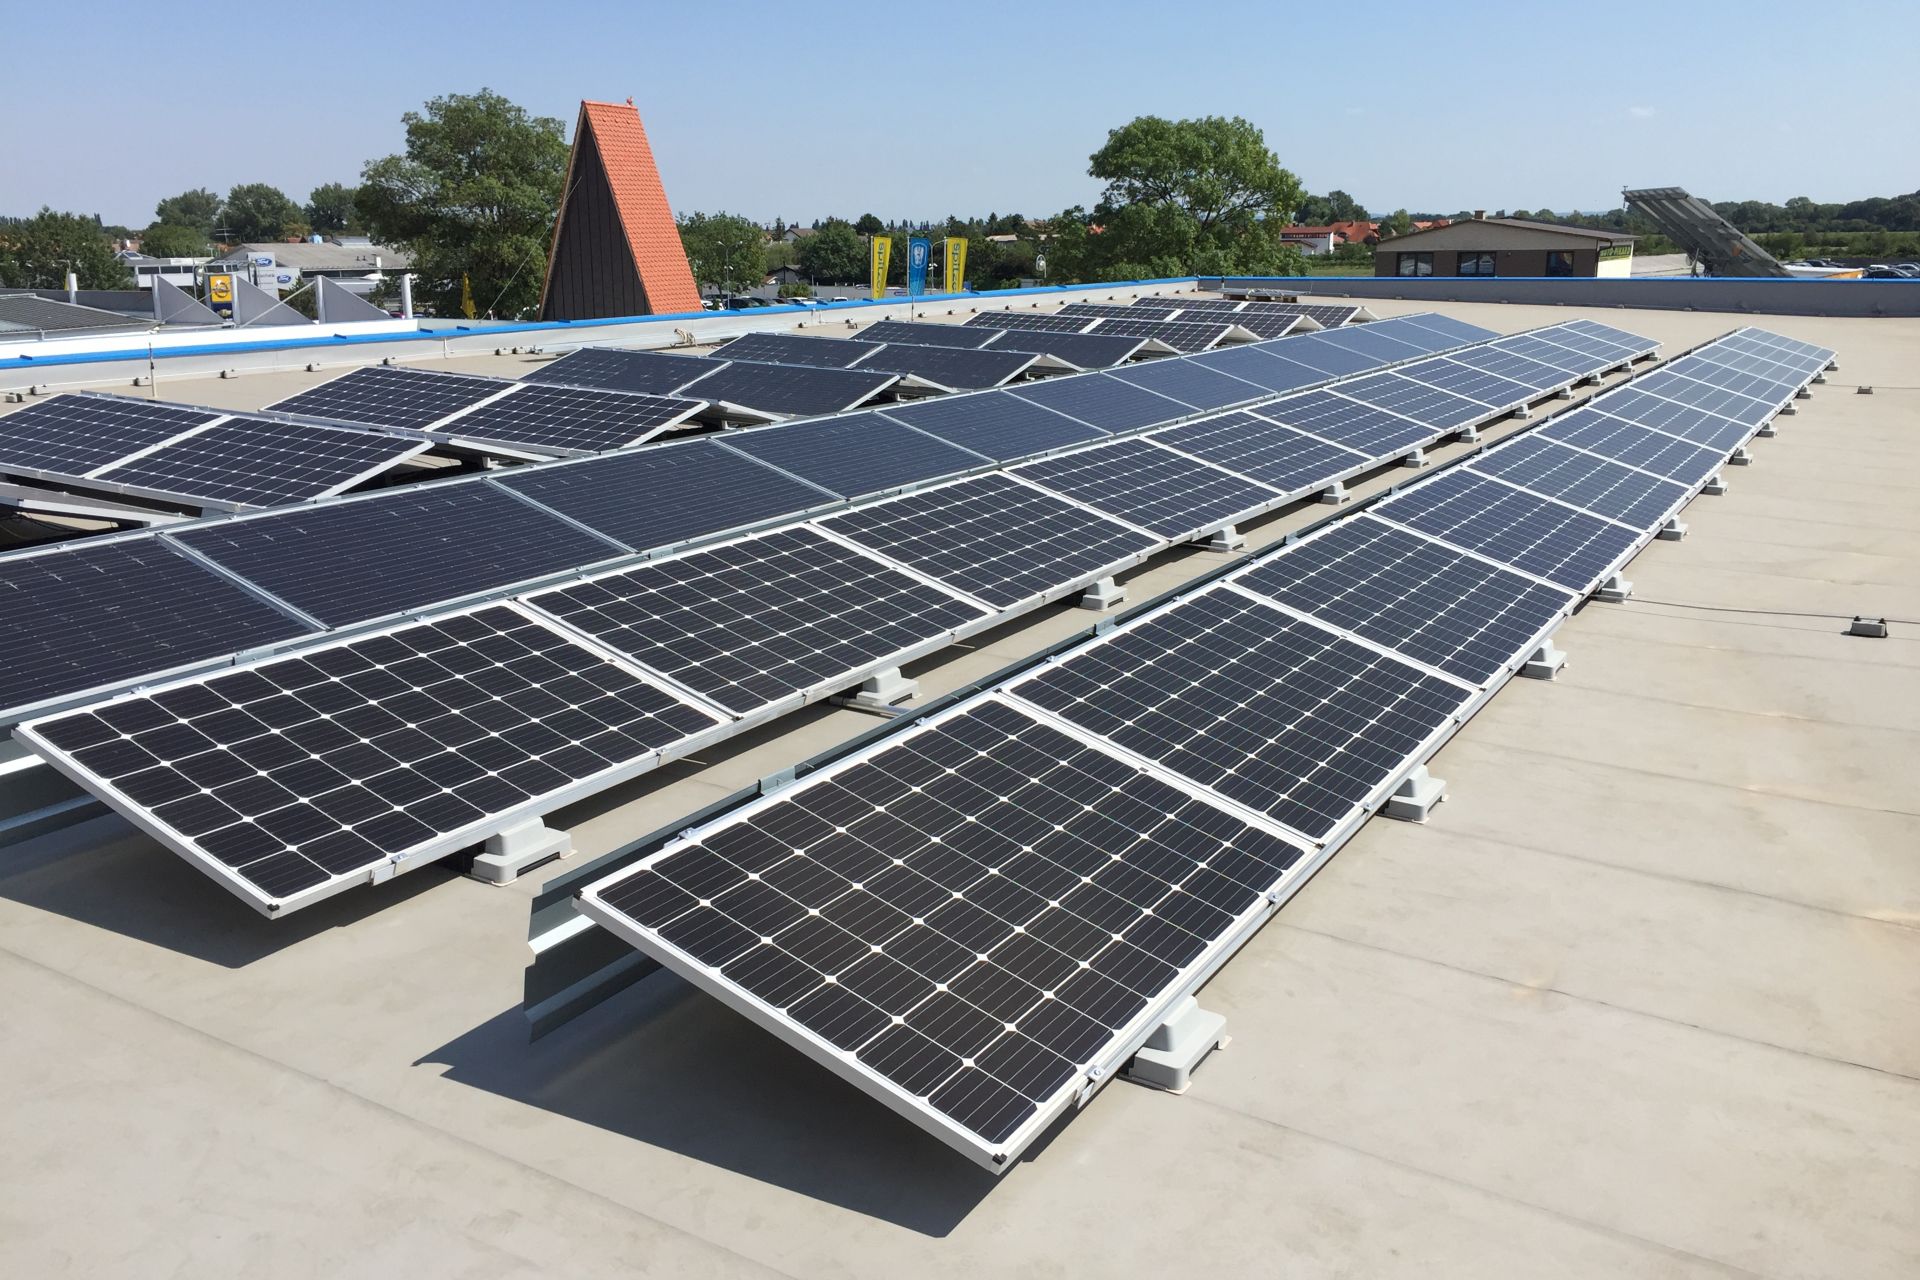 Sika SolarMount-1 on solar roof installed in south configuration in Oeynhausen, Germany